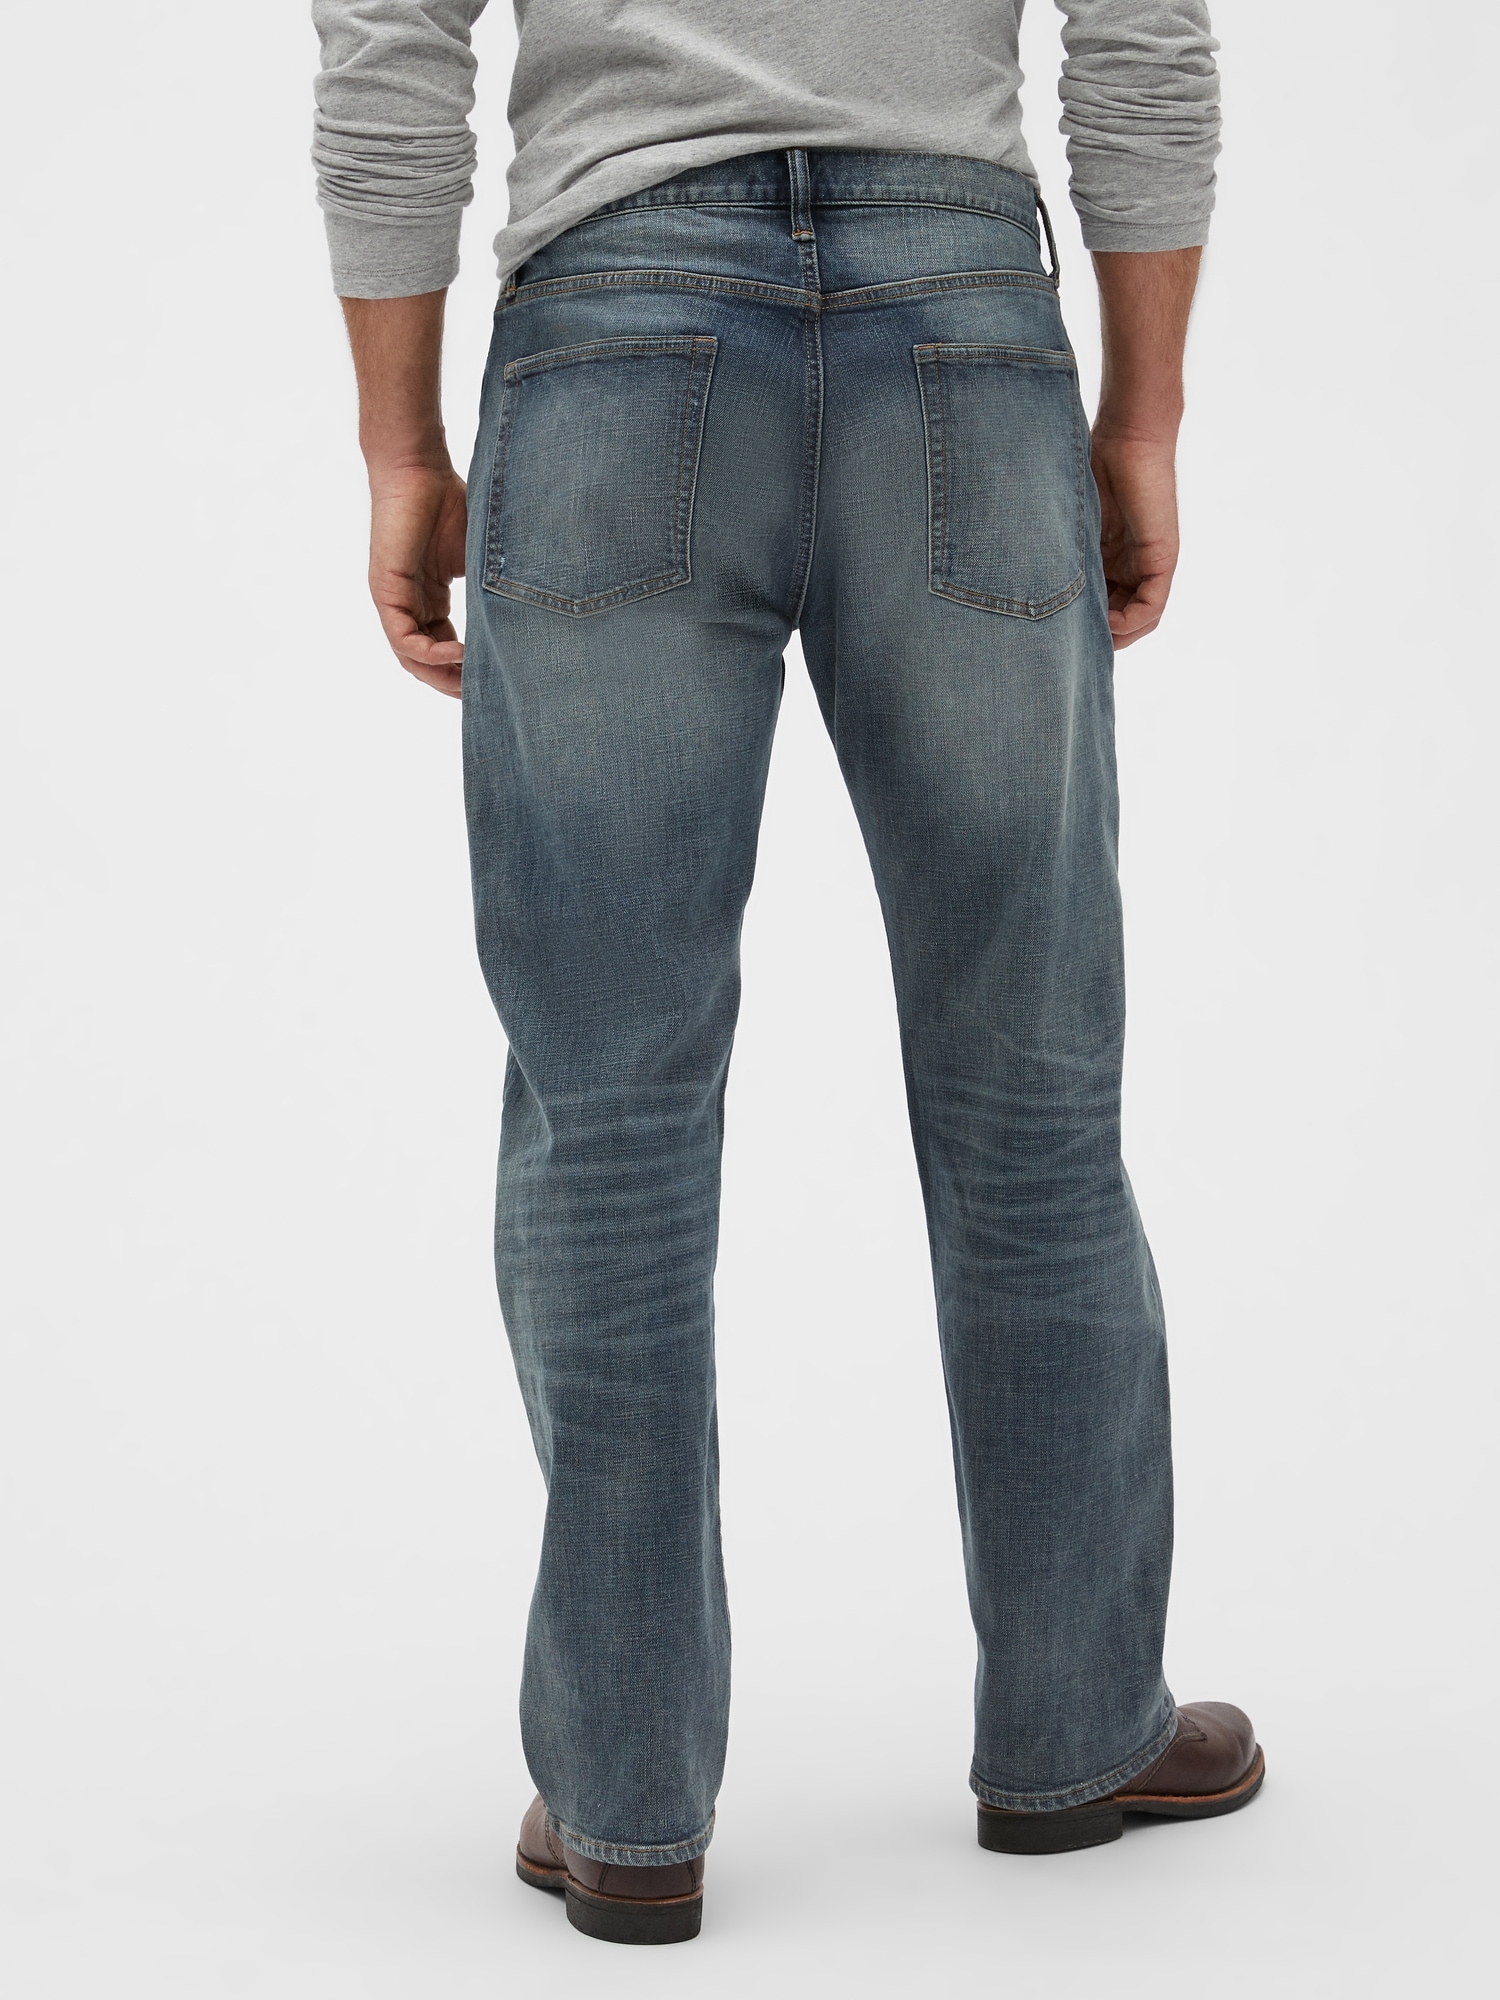 Relaxed Gapflex Jeans With Washwell™ | Gap Factory